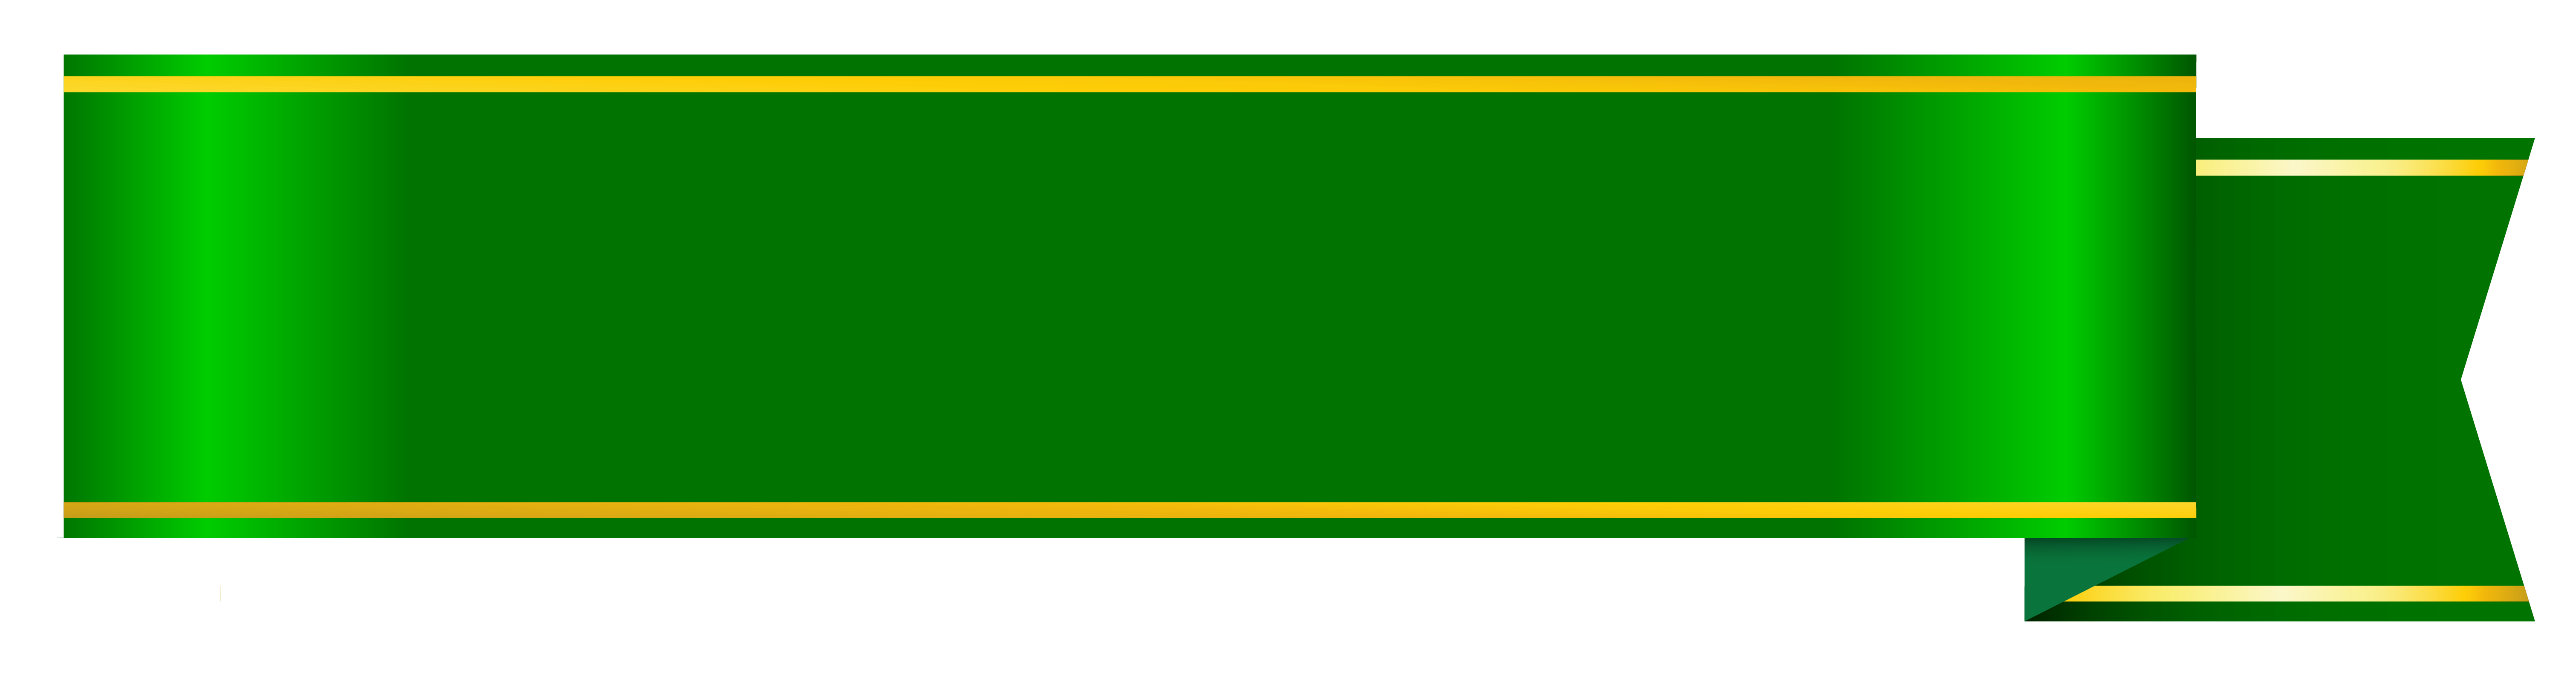 Green Banner Unduh PNG Image